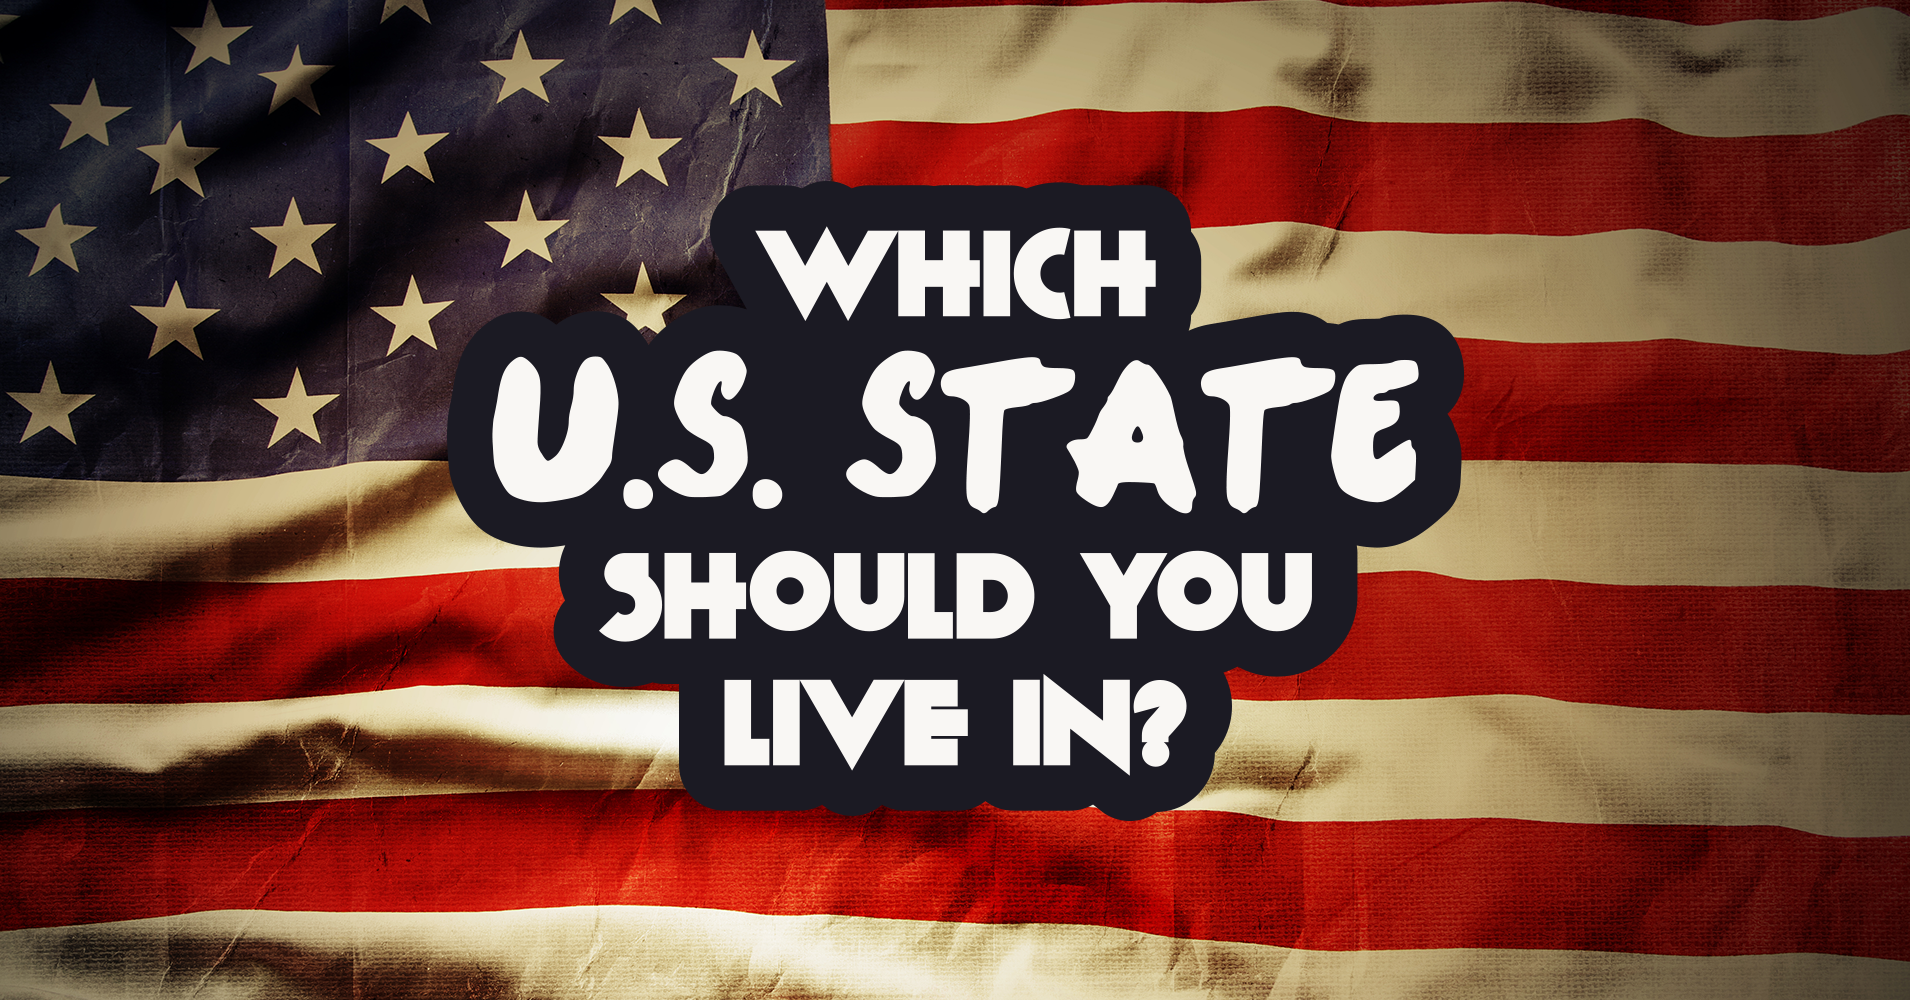 Where should I live in us?